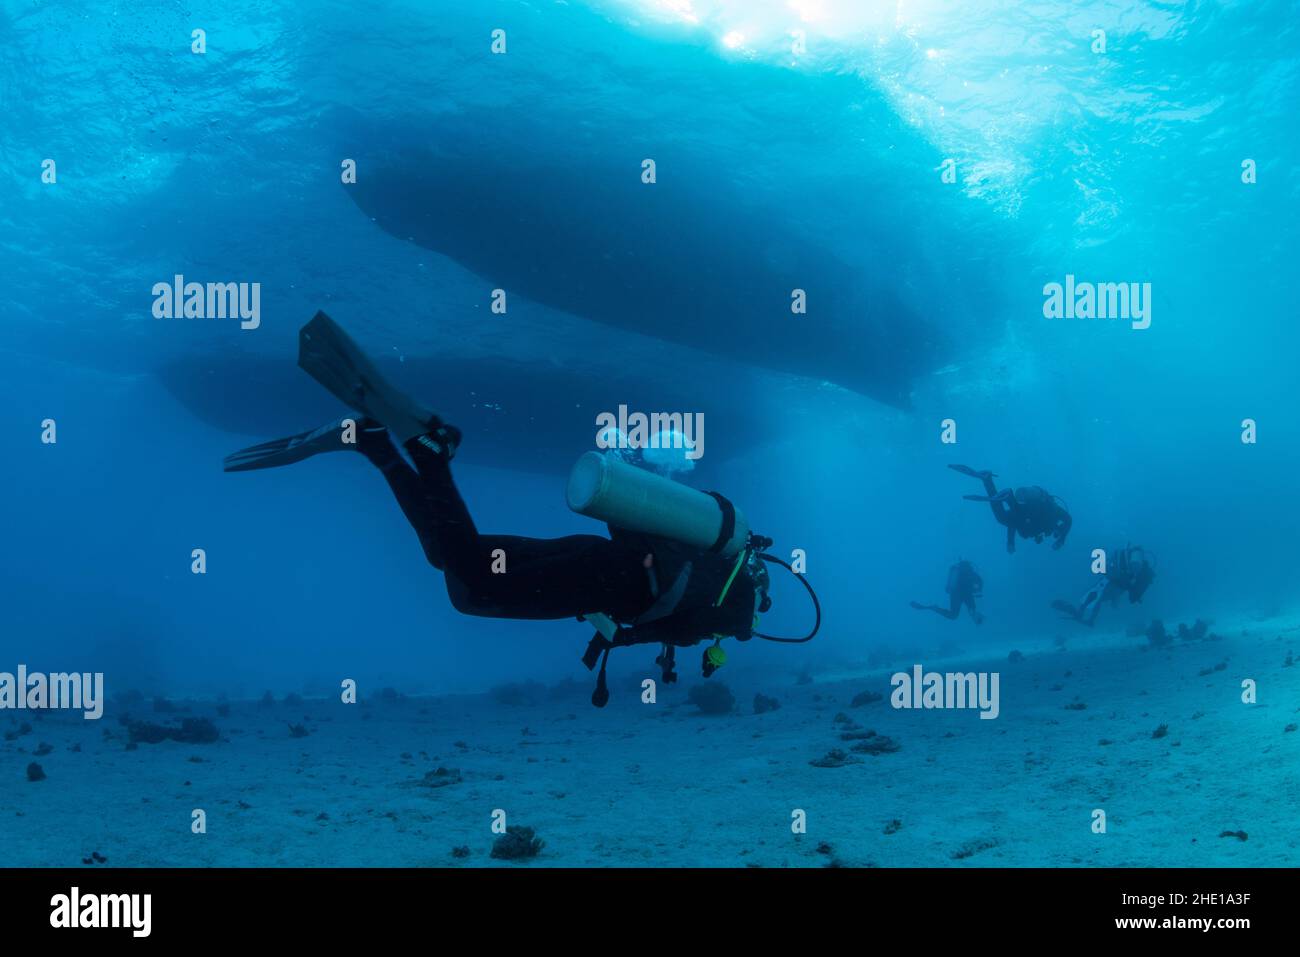 A scuba diver passes underneath moored boats in the clear waters of the Red Sea off the coast of Hurghada, Egypt. Stock Photo